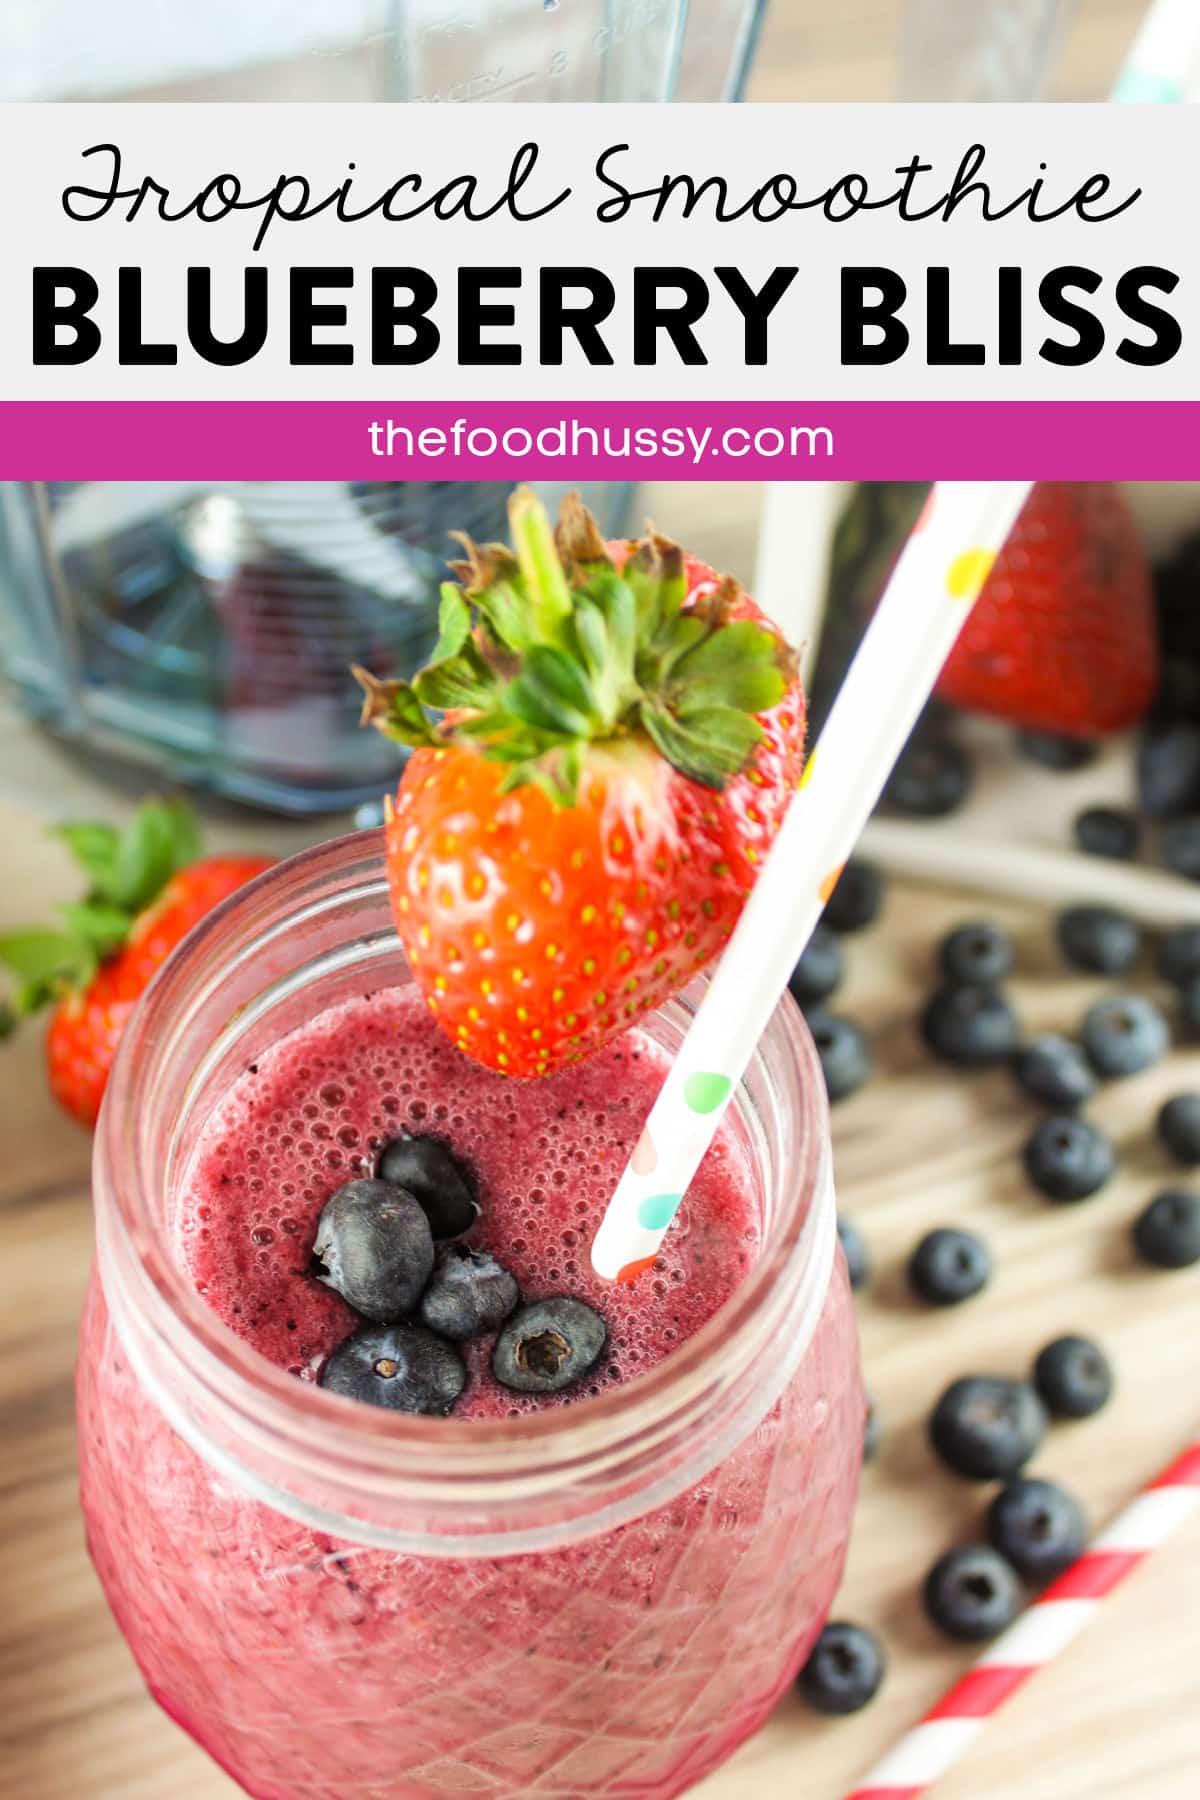 The Blueberry Bliss from Tropical Smoothie is a super healthy snack any time of day. Fresh fruit and a little sweetness is about all you'll find in this delicious smoothie! via @foodhussy